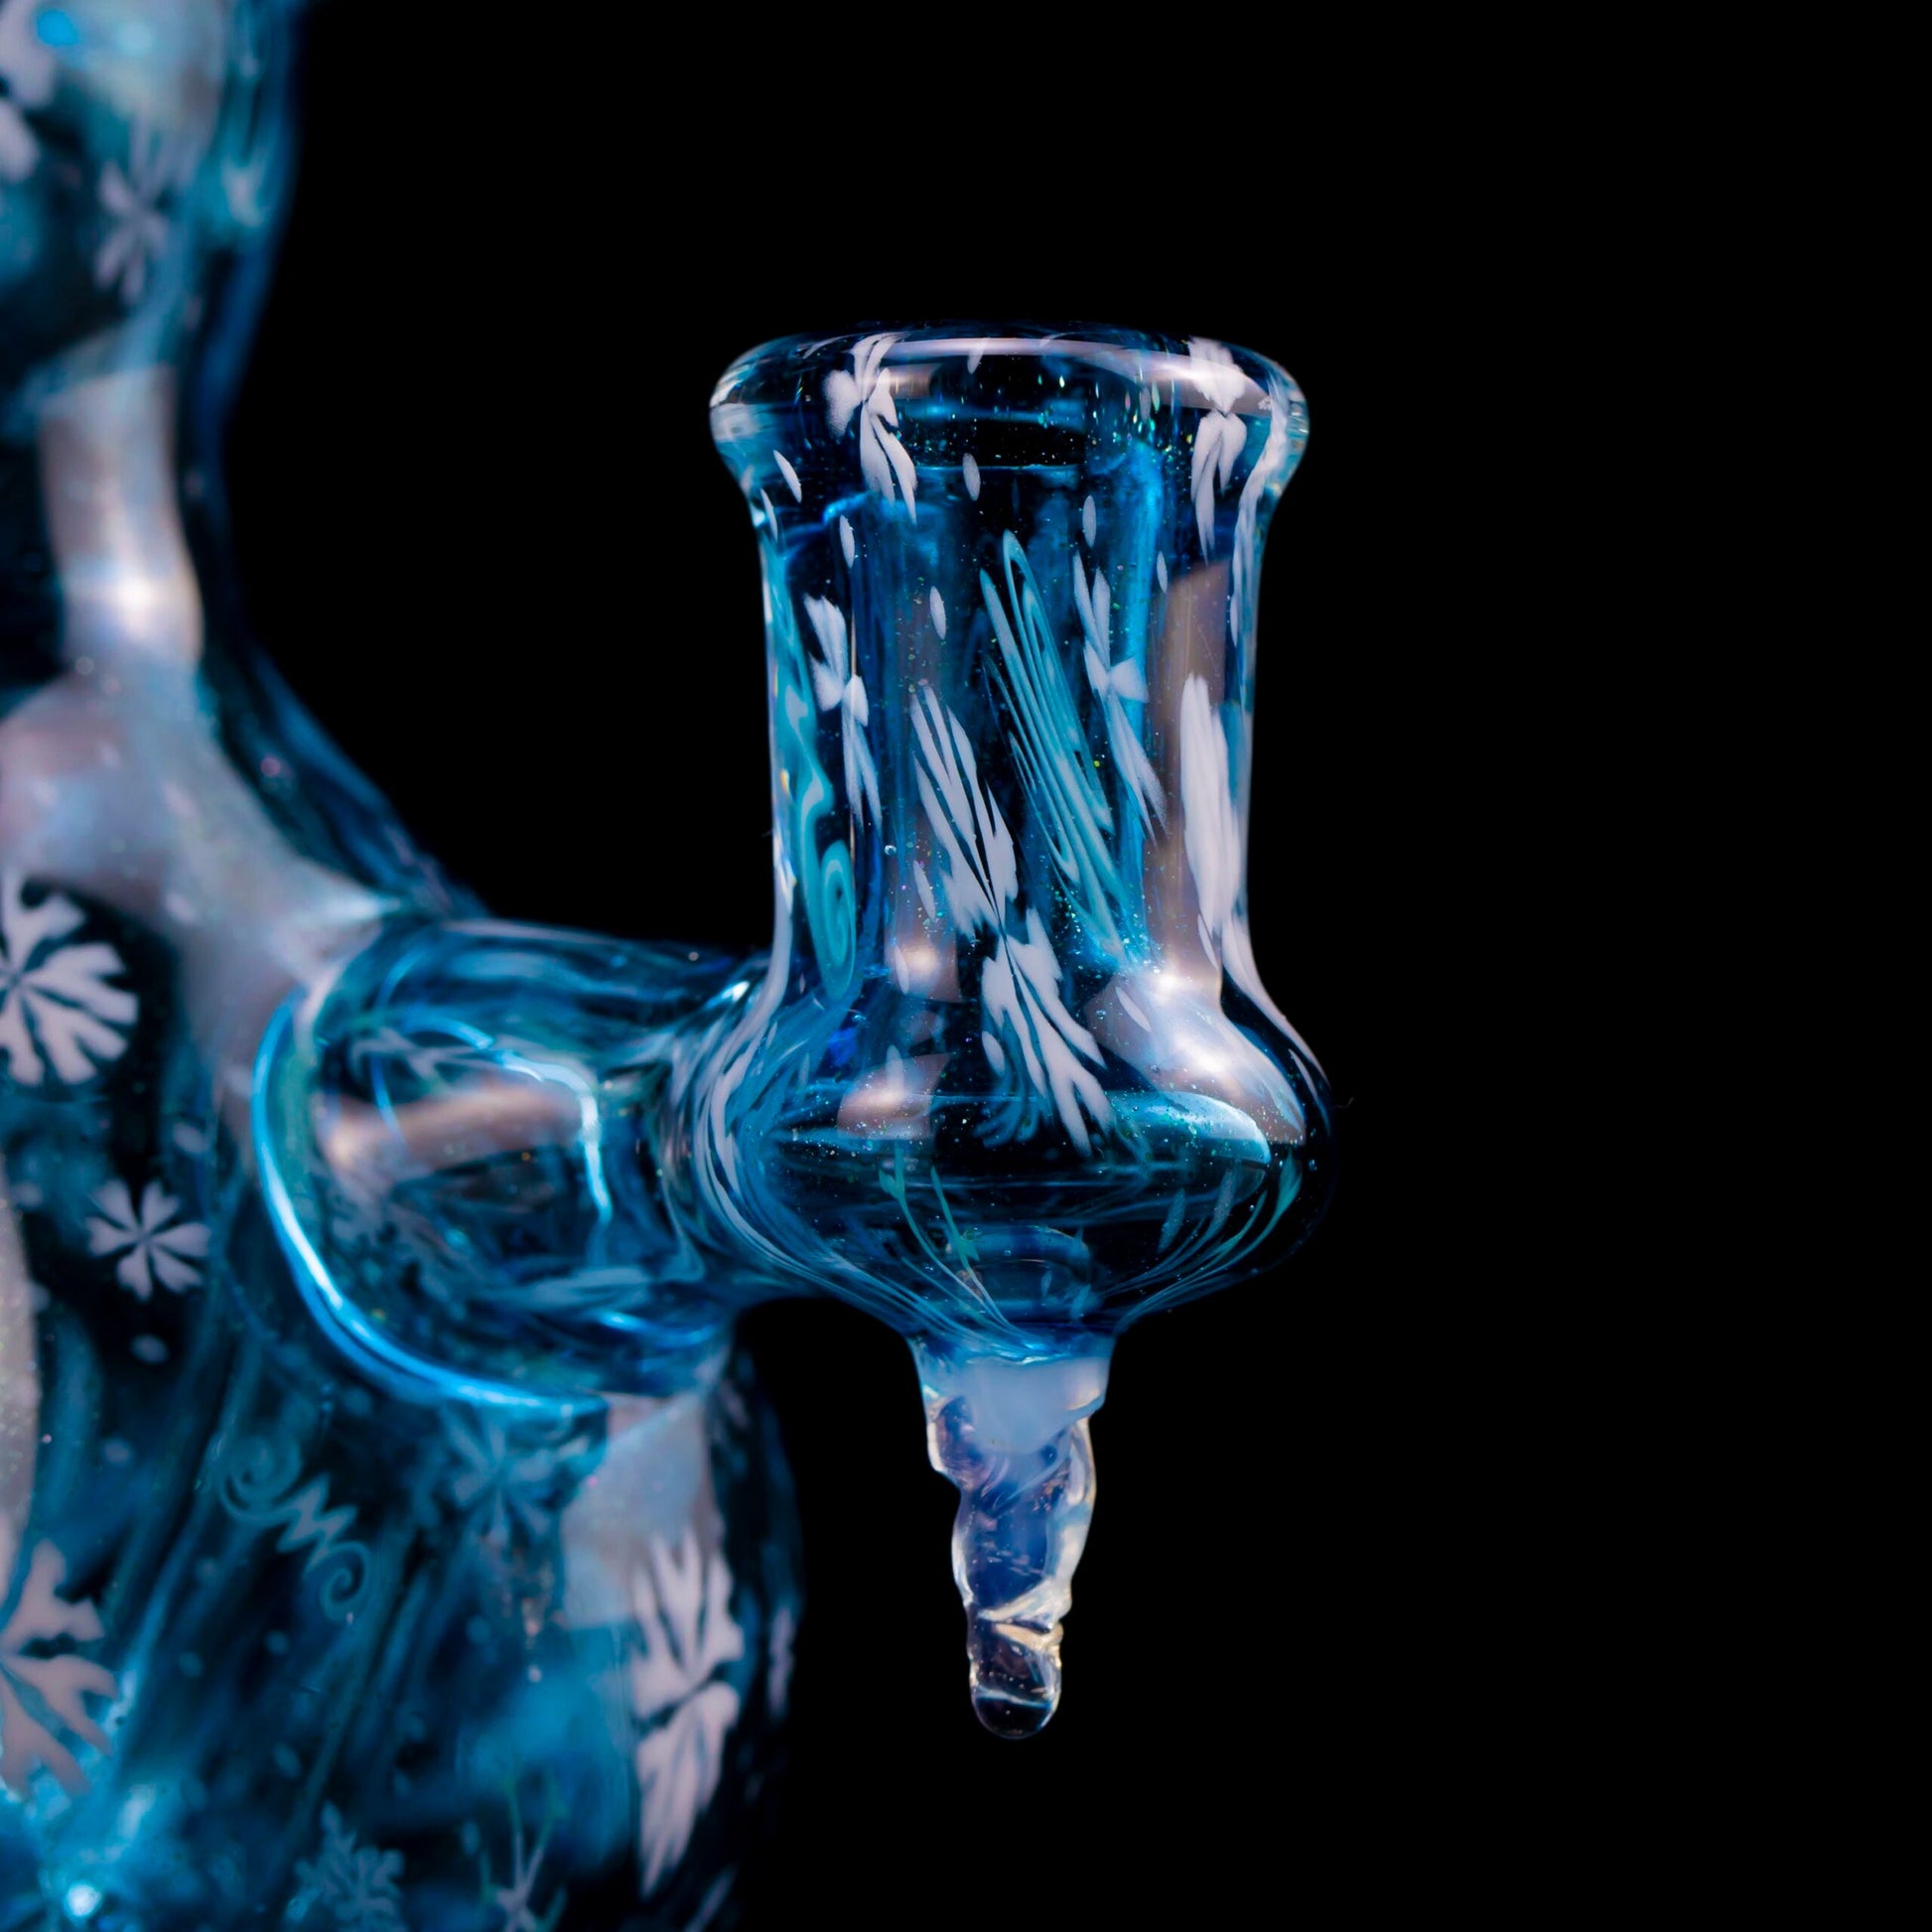 luxurious design of the Frenchie Rig by Chaka Glass x Swanny (2023)